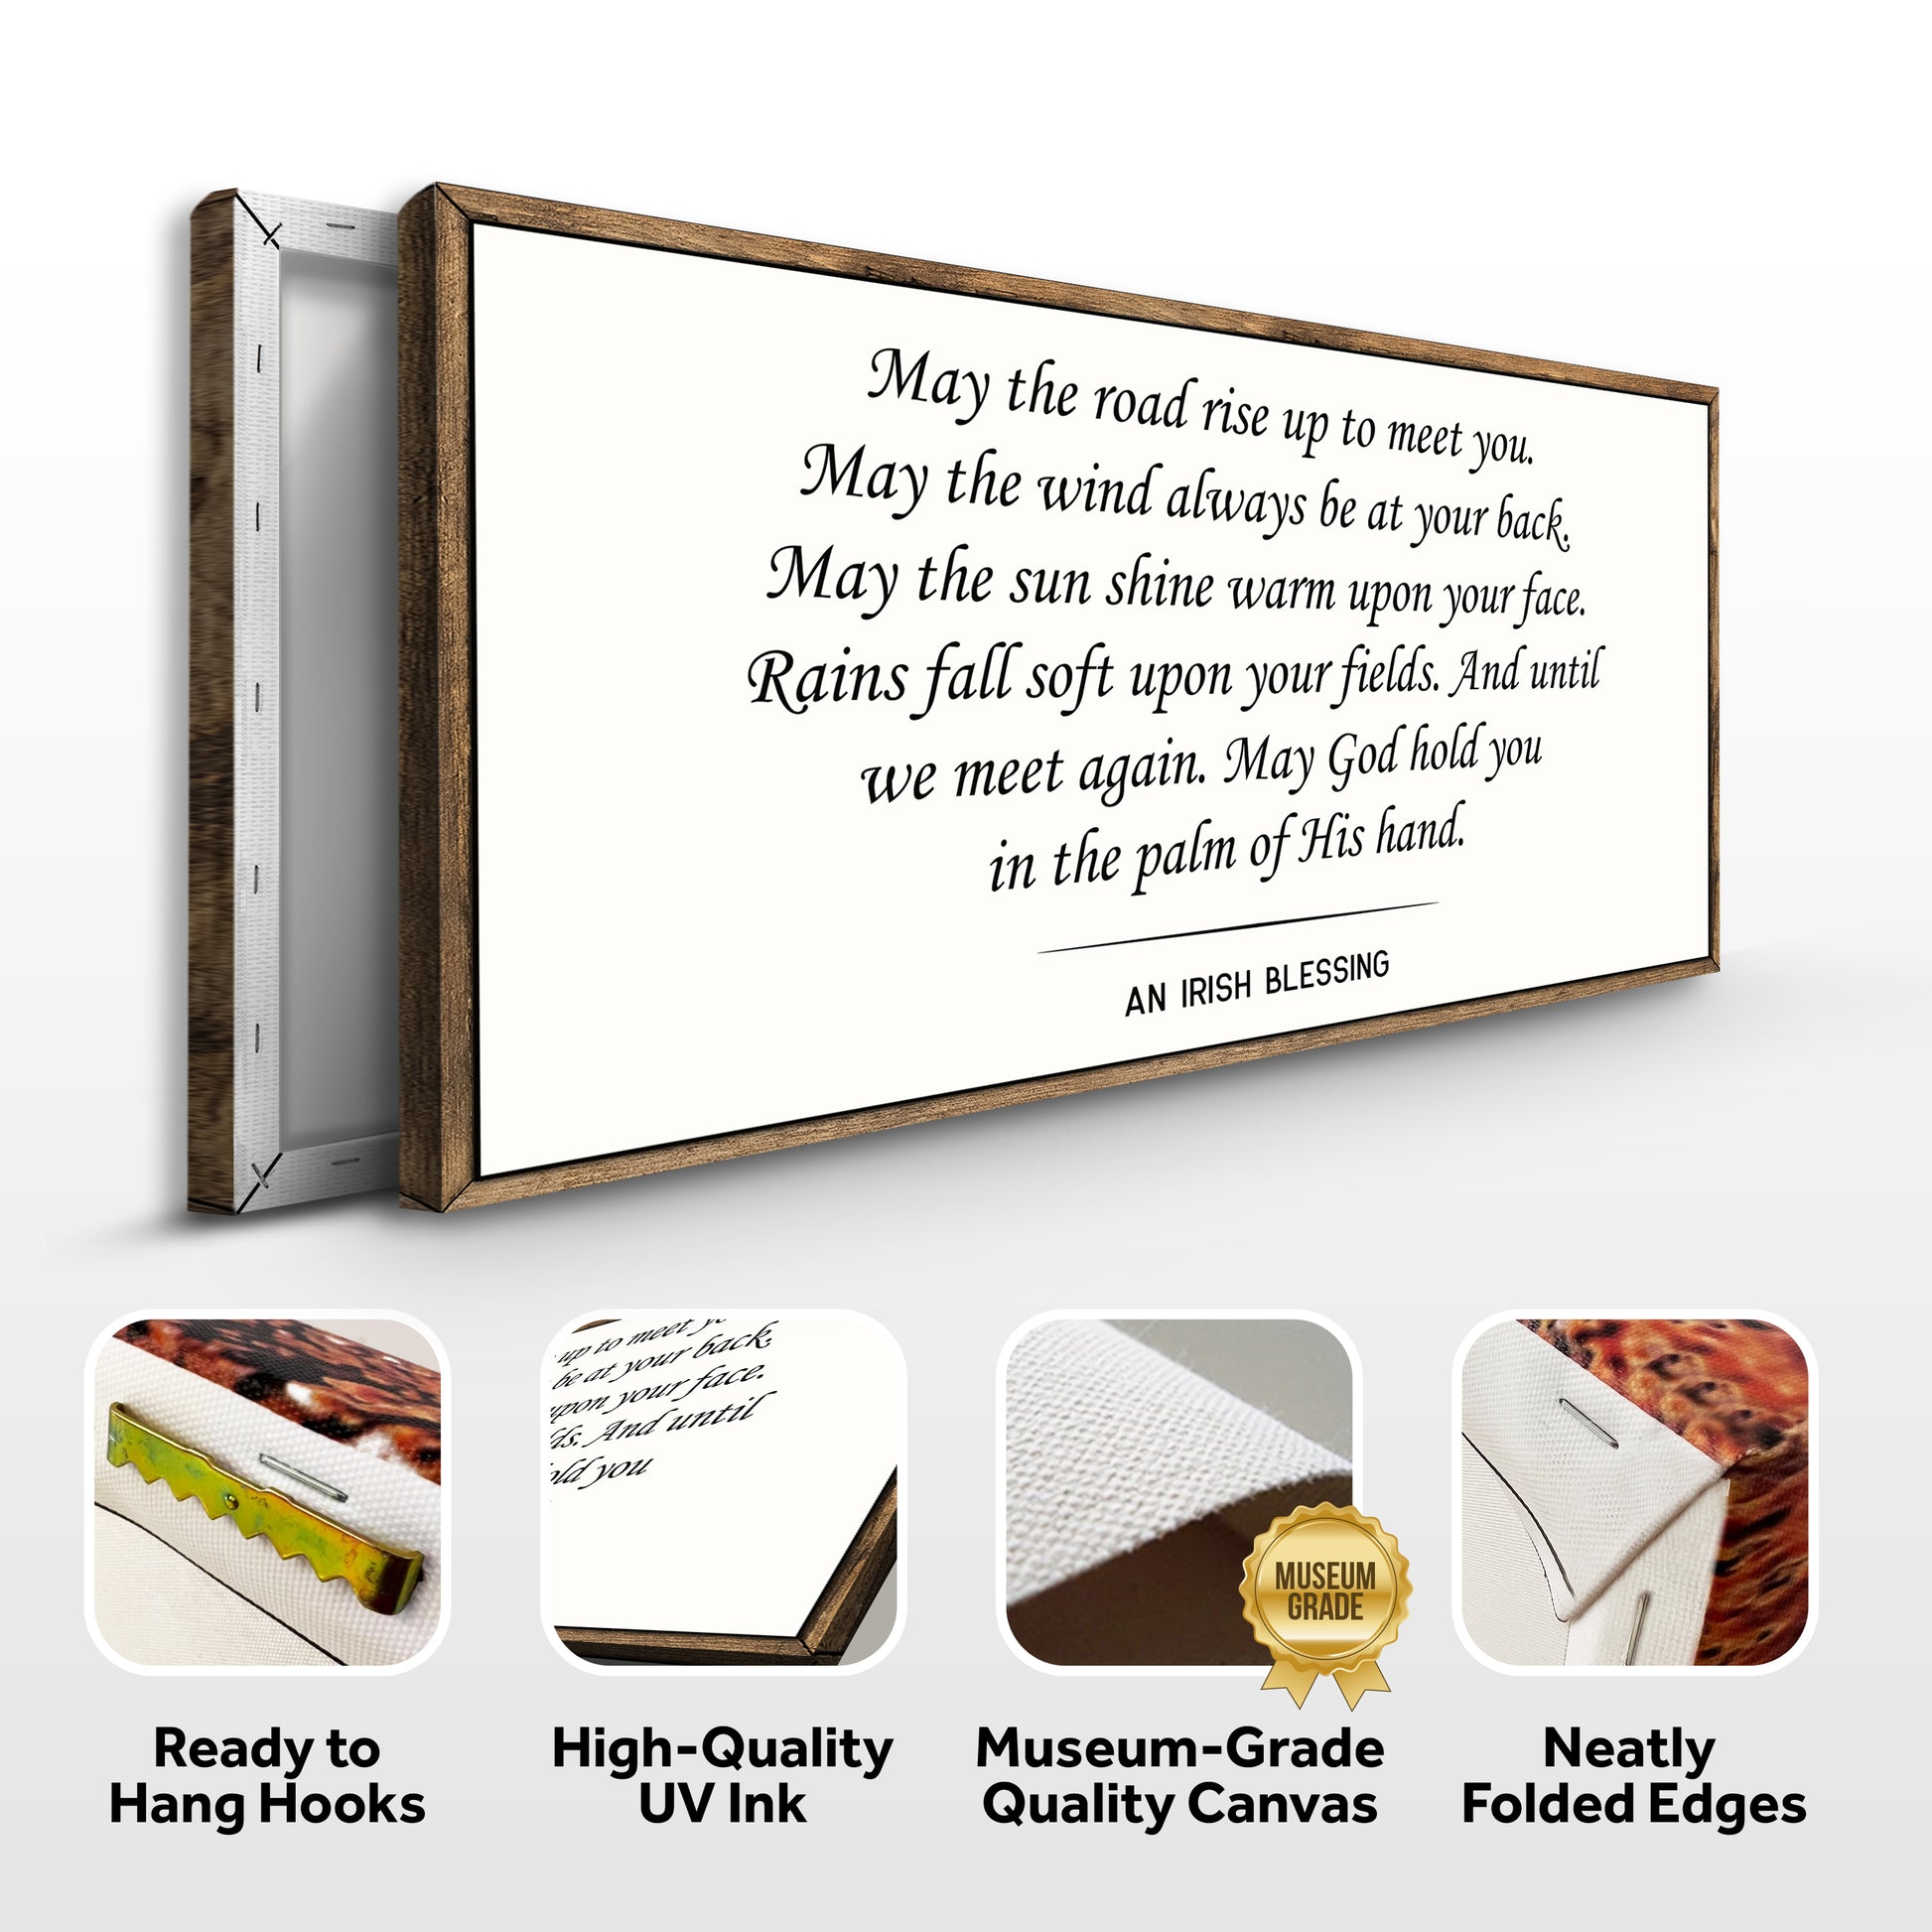 Irish Blessing Farmhouse Sign Specs - Image by Tailored Canvases